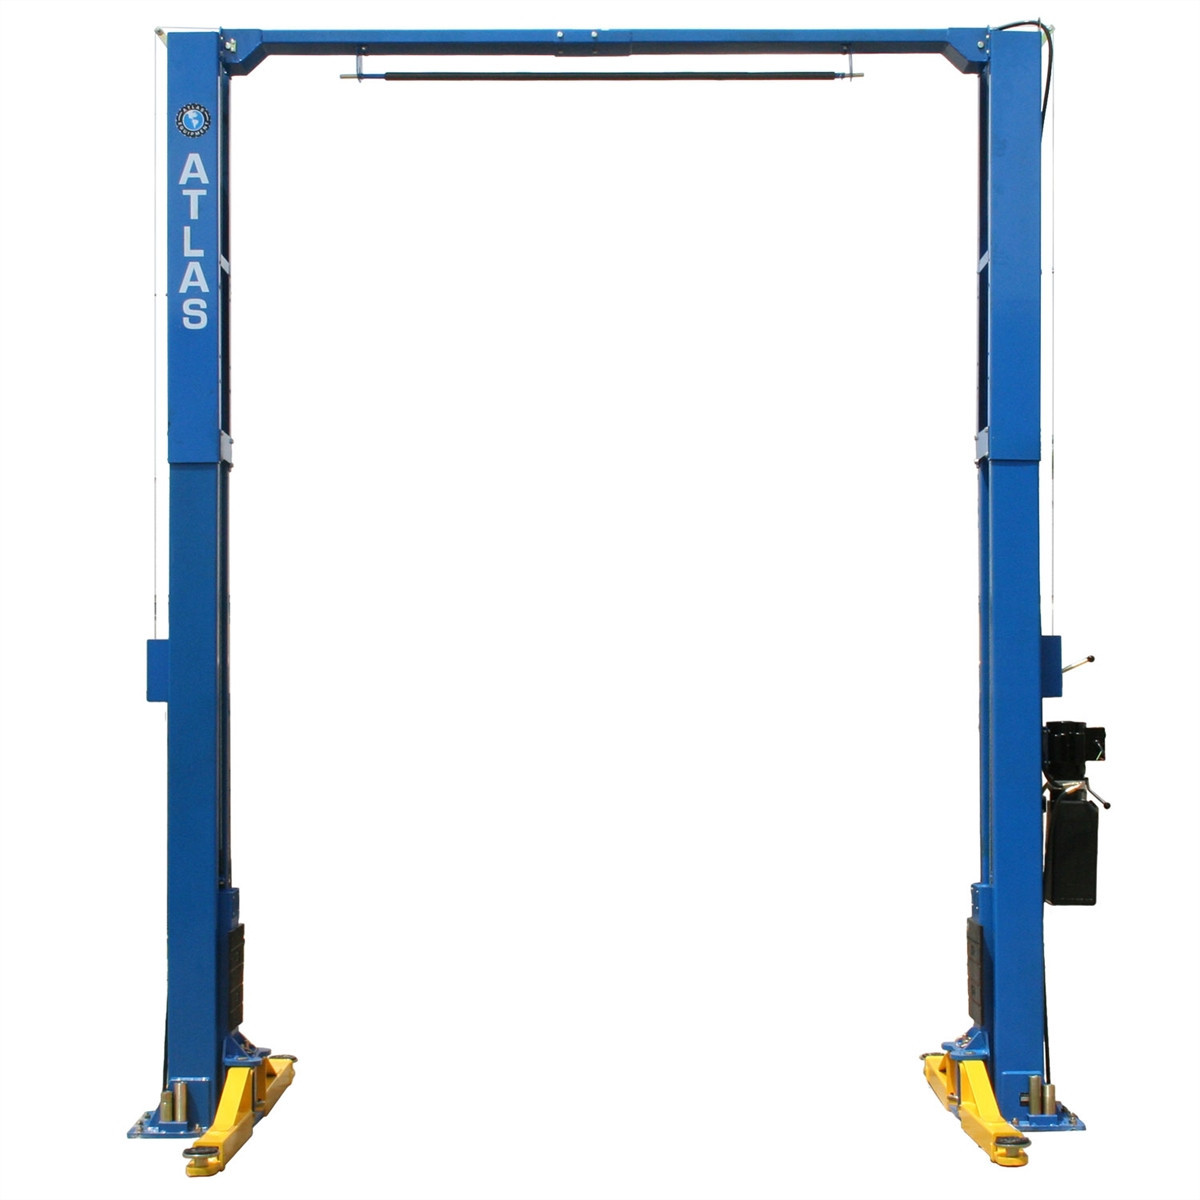 EXTRA WIDE/EXTRA TALL Atlas PV-12P Overhead 12,000 lbs capacity Adjustable Height 2 Post Lift 